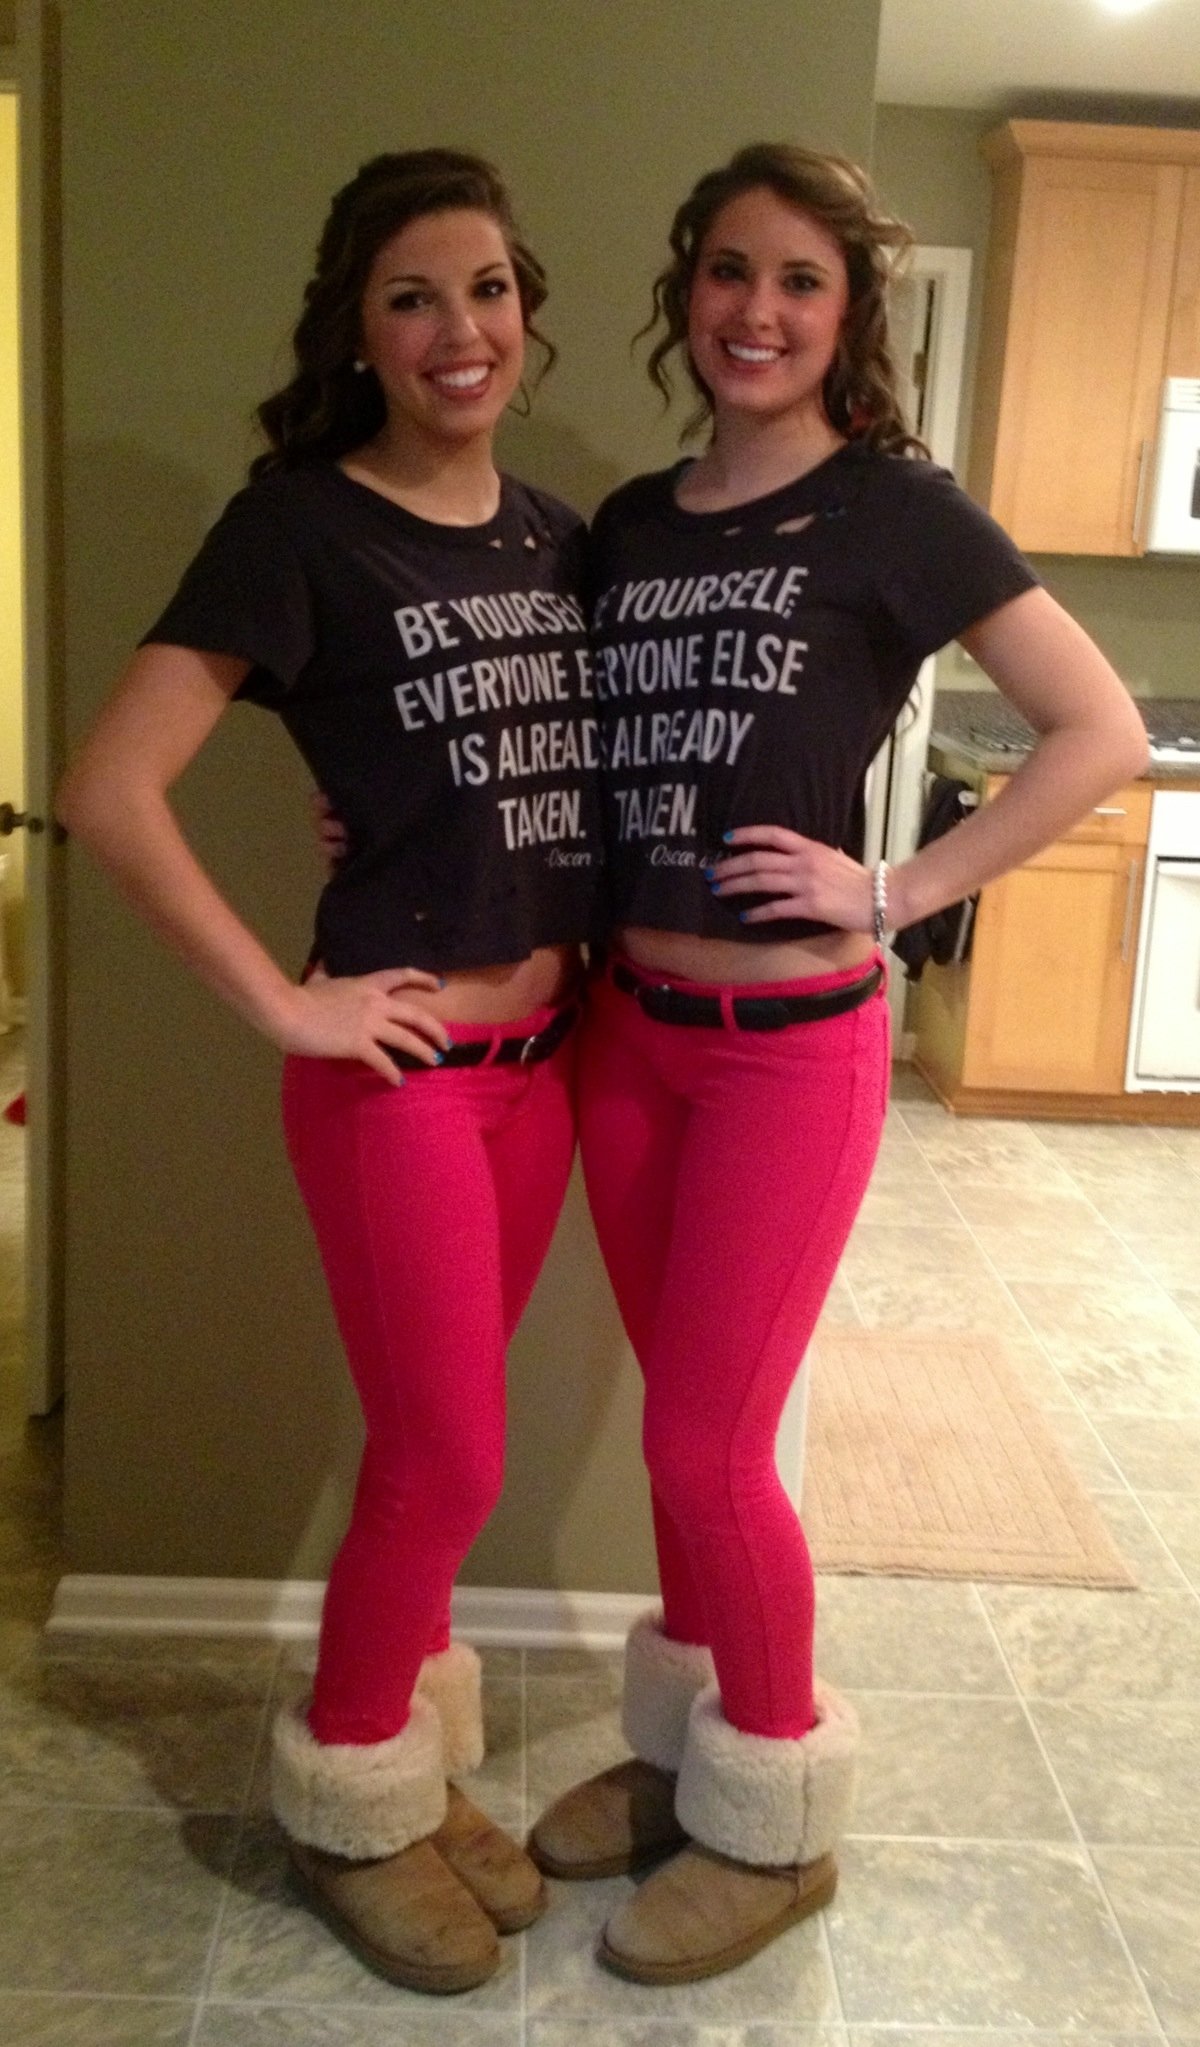 10 Trendy Halloween Costume Ideas For Two Girls best friend twins 3 funny halloween costumes funny stuff 15 2022